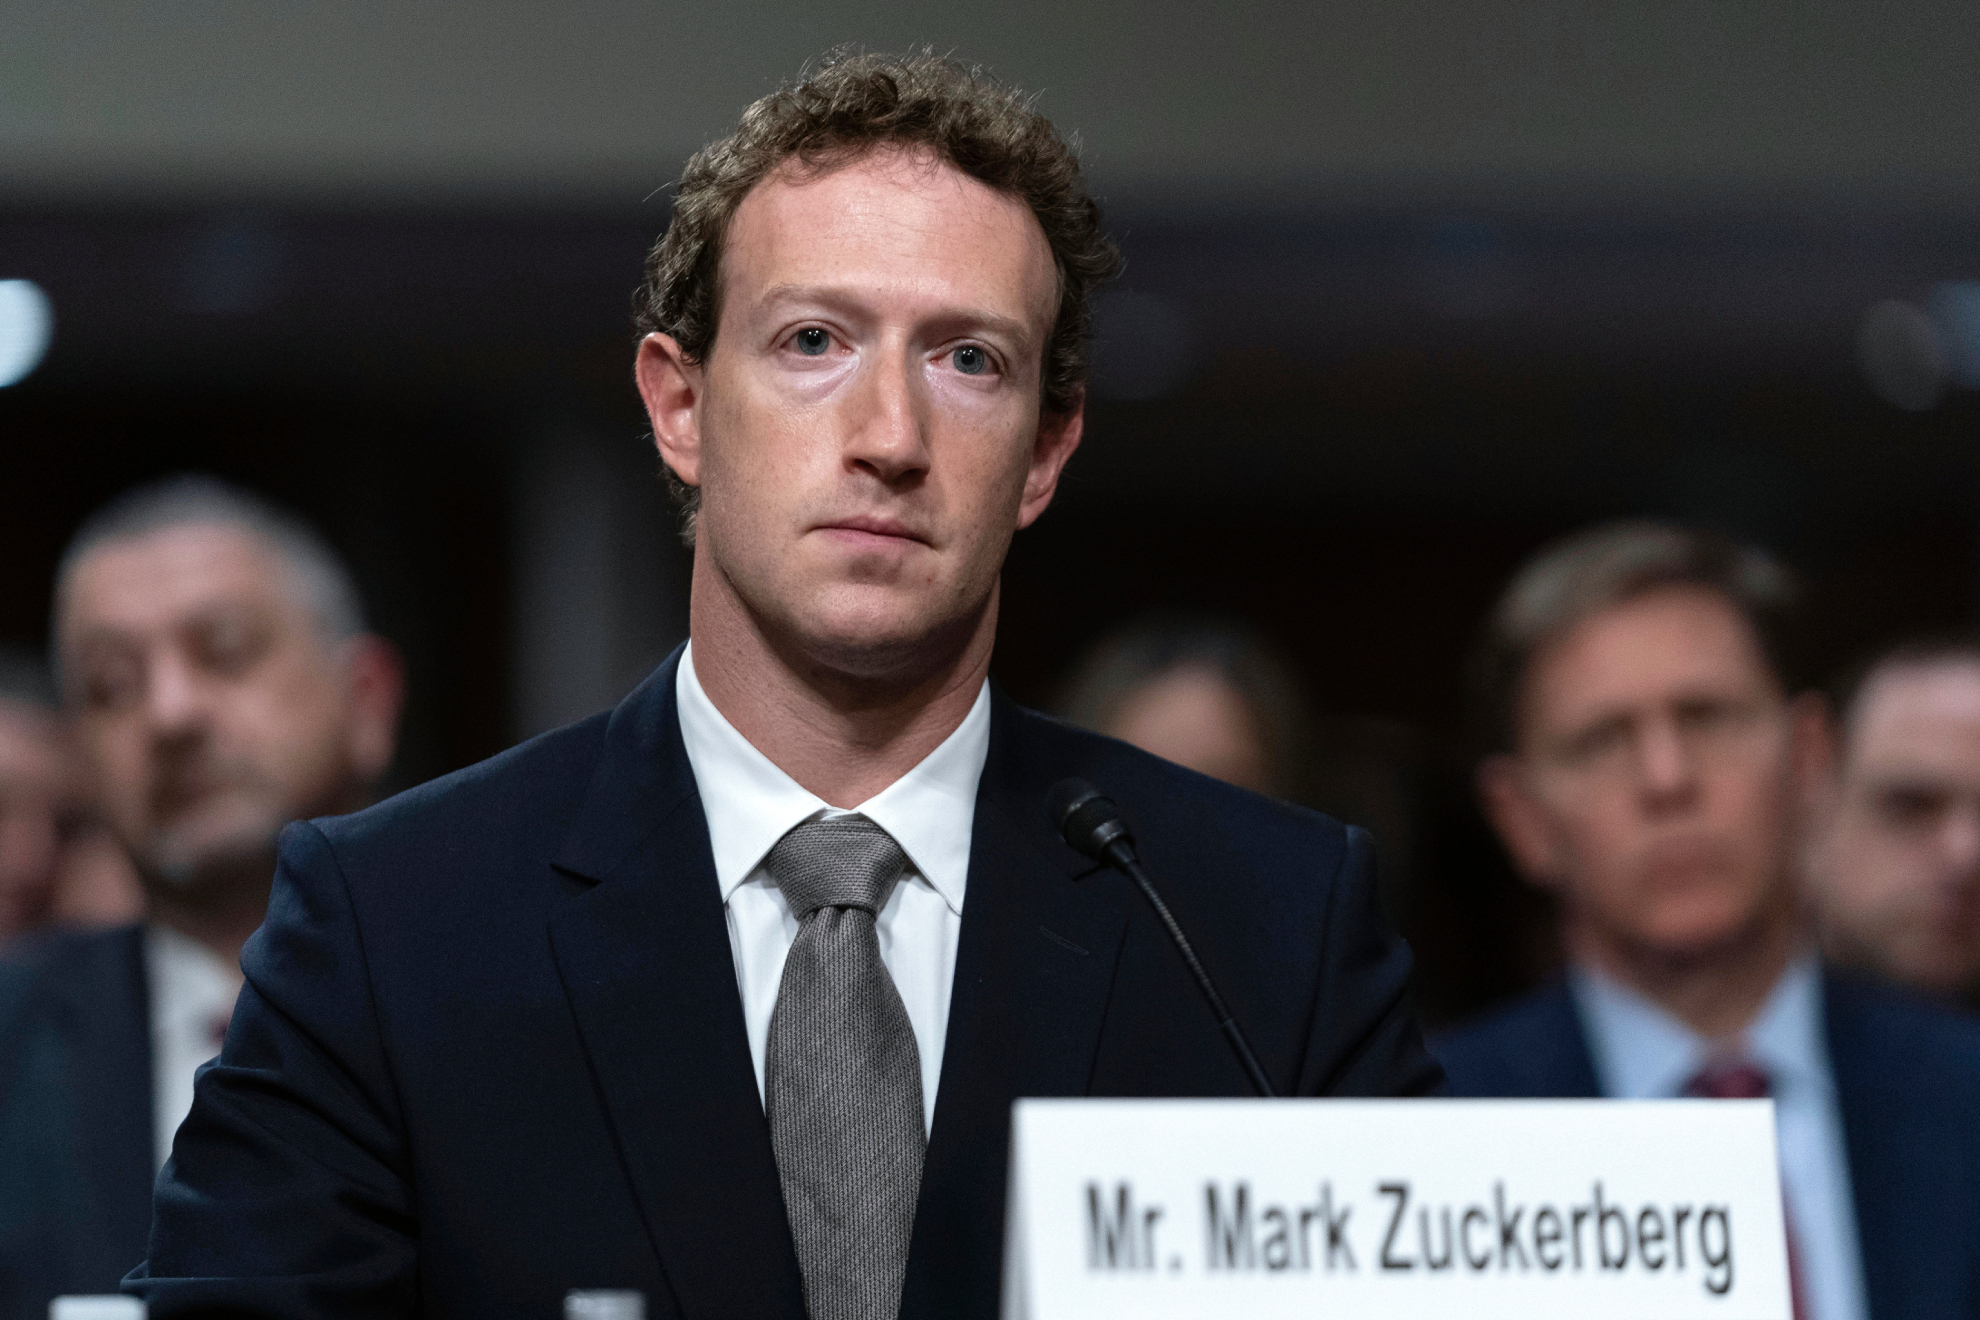 Zuckerberg apologizes to parents of minors in U.S. Senate after being accused of having blood on his hands